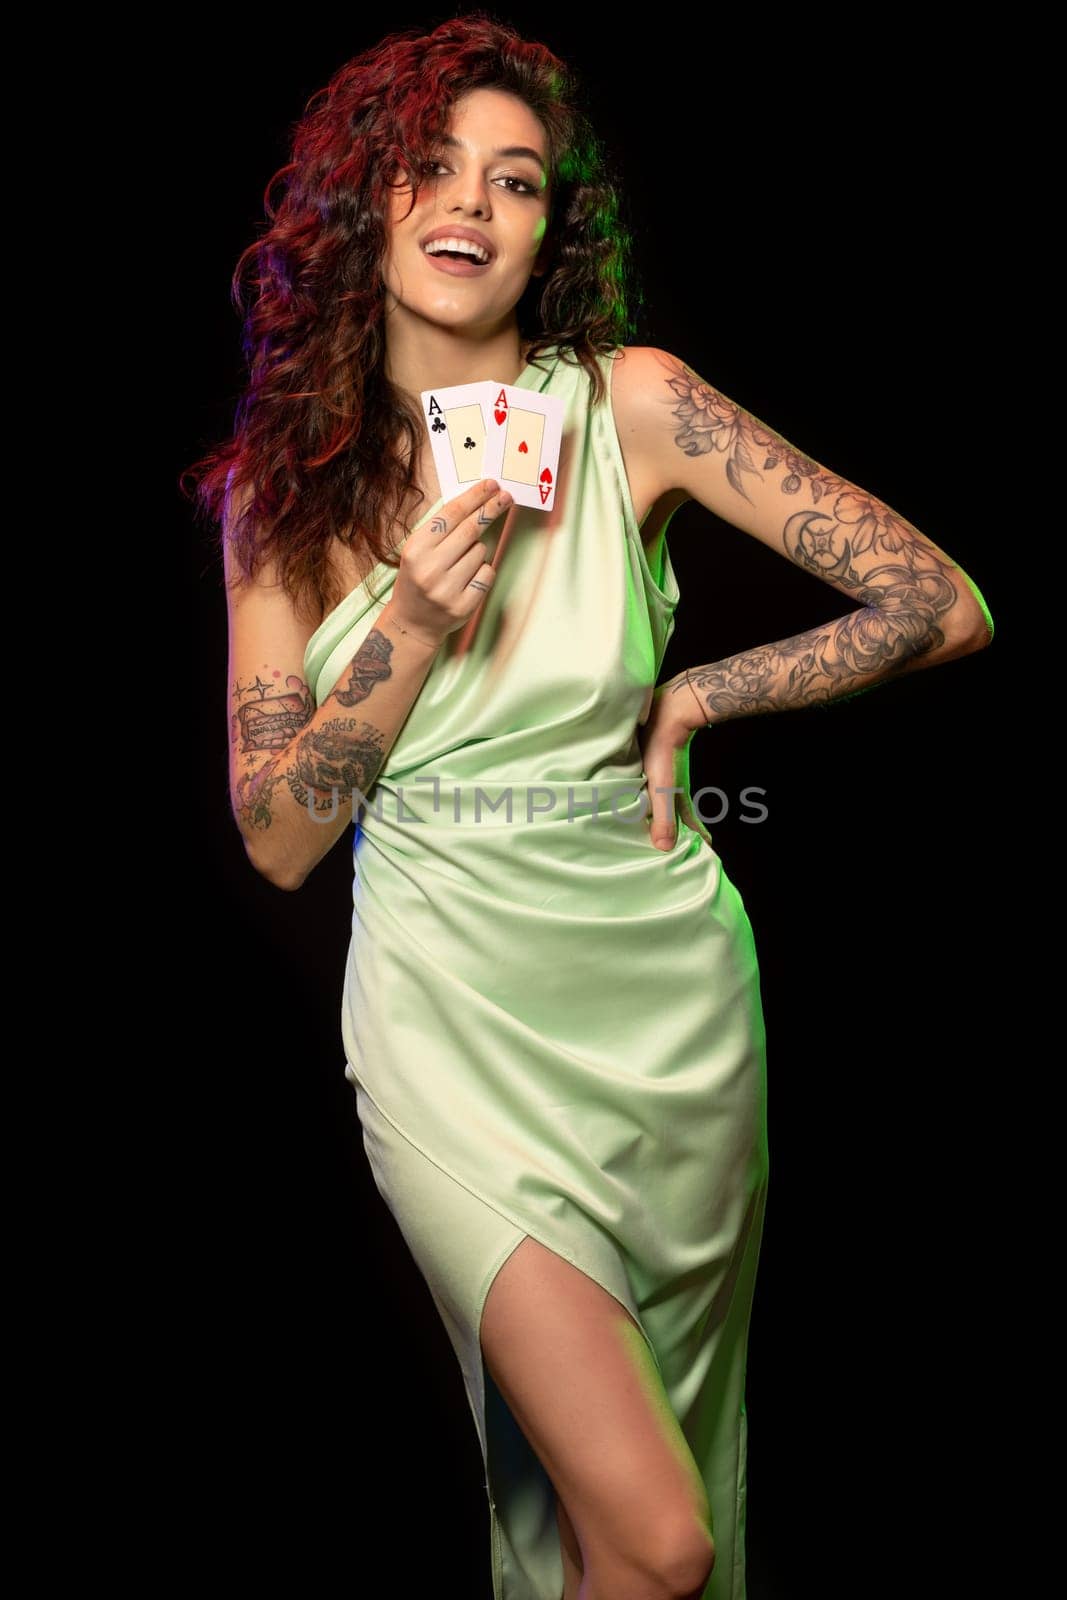 Young poker player girl playfully showing pair of winning aces by nazarovsergey